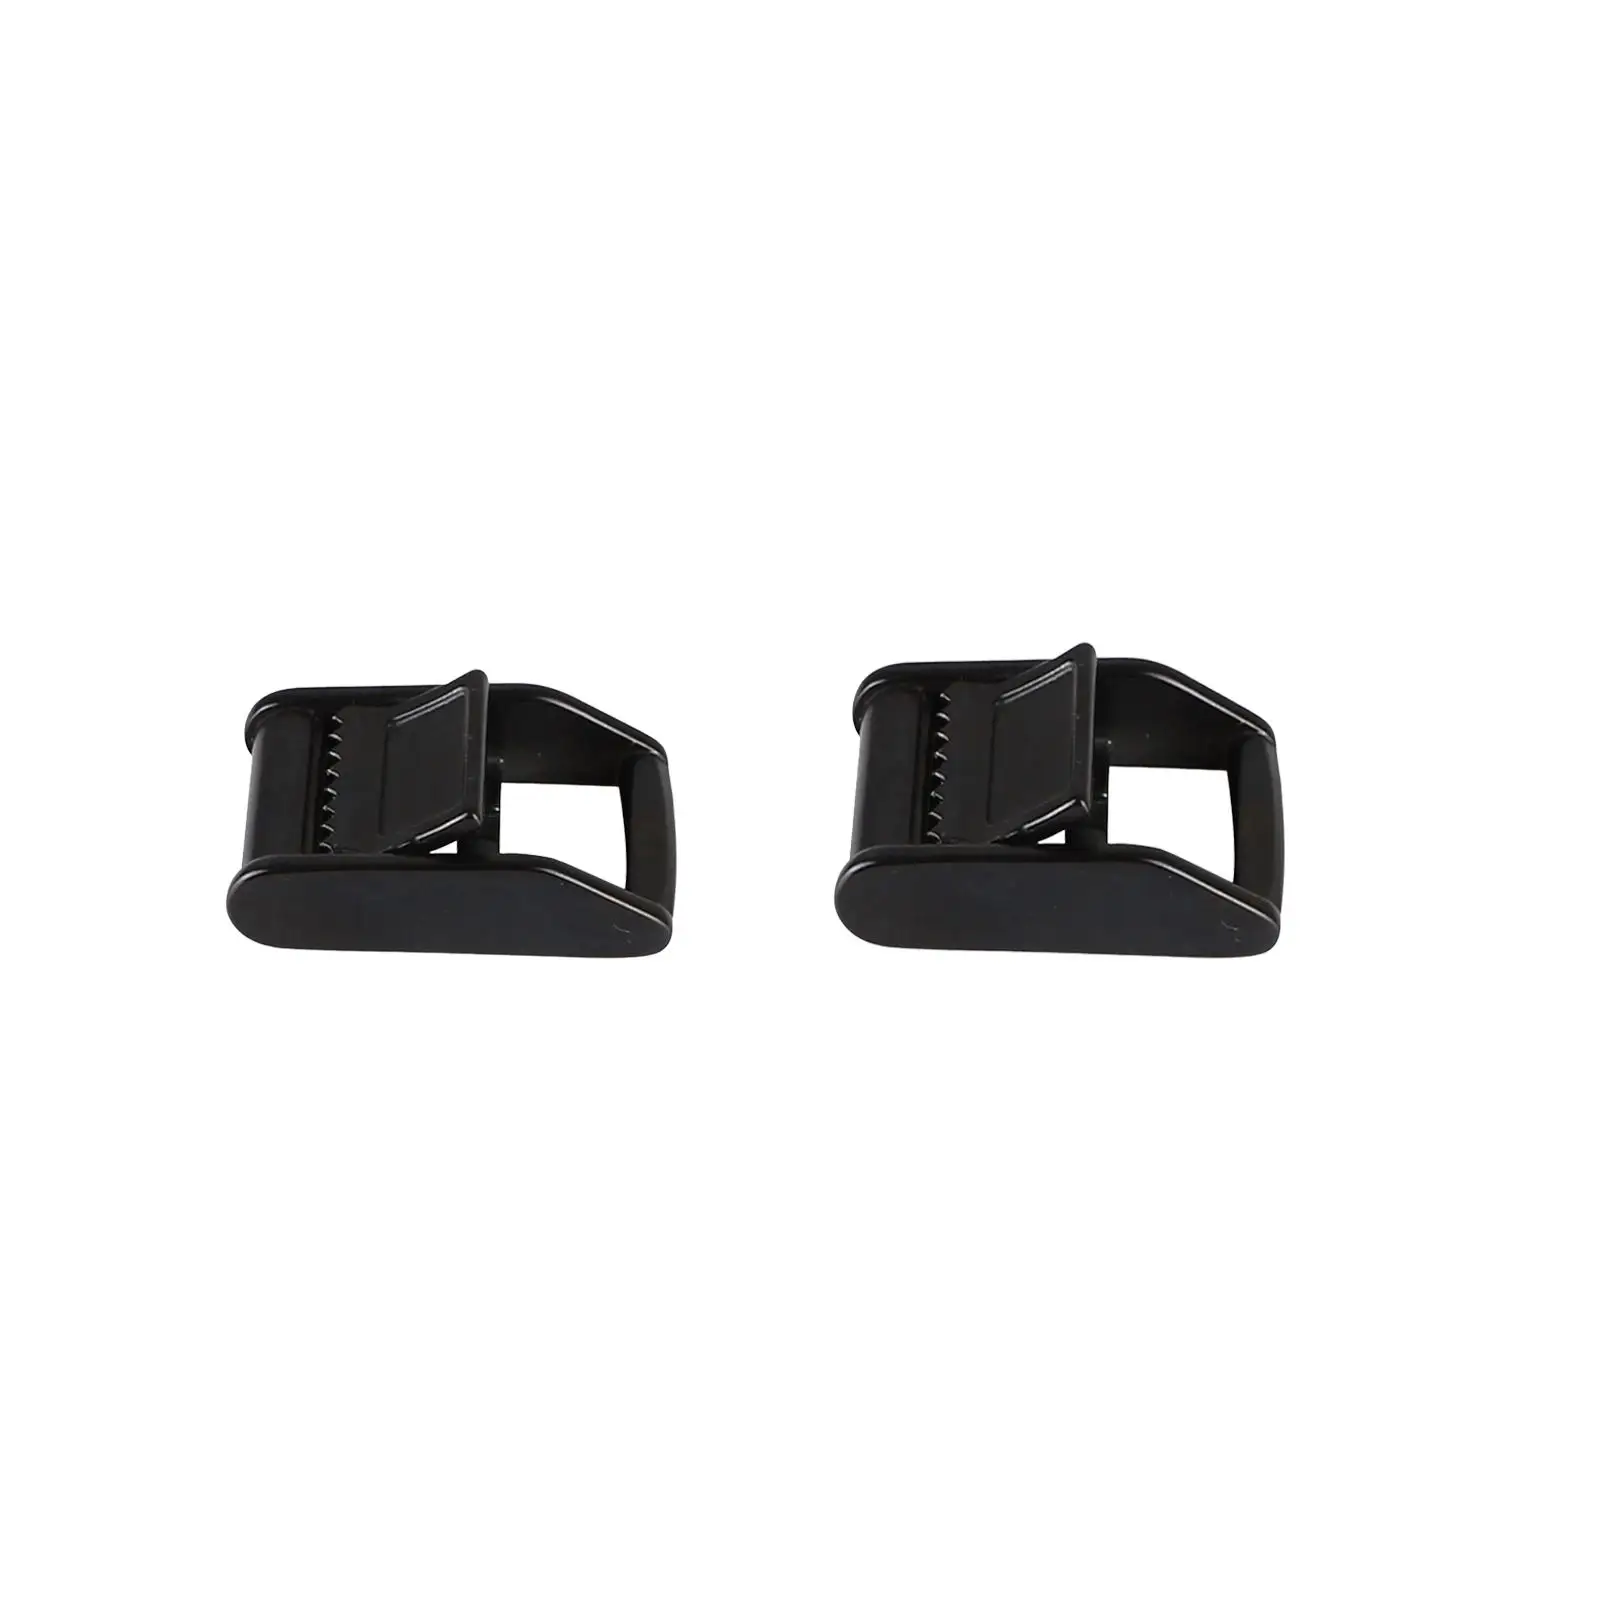 Webbing Buckle Durable Portable Tightening Buckle Belt Buckle Parts for Webbing Strap Fanny Pack Cargo Lashing Tightening Bags